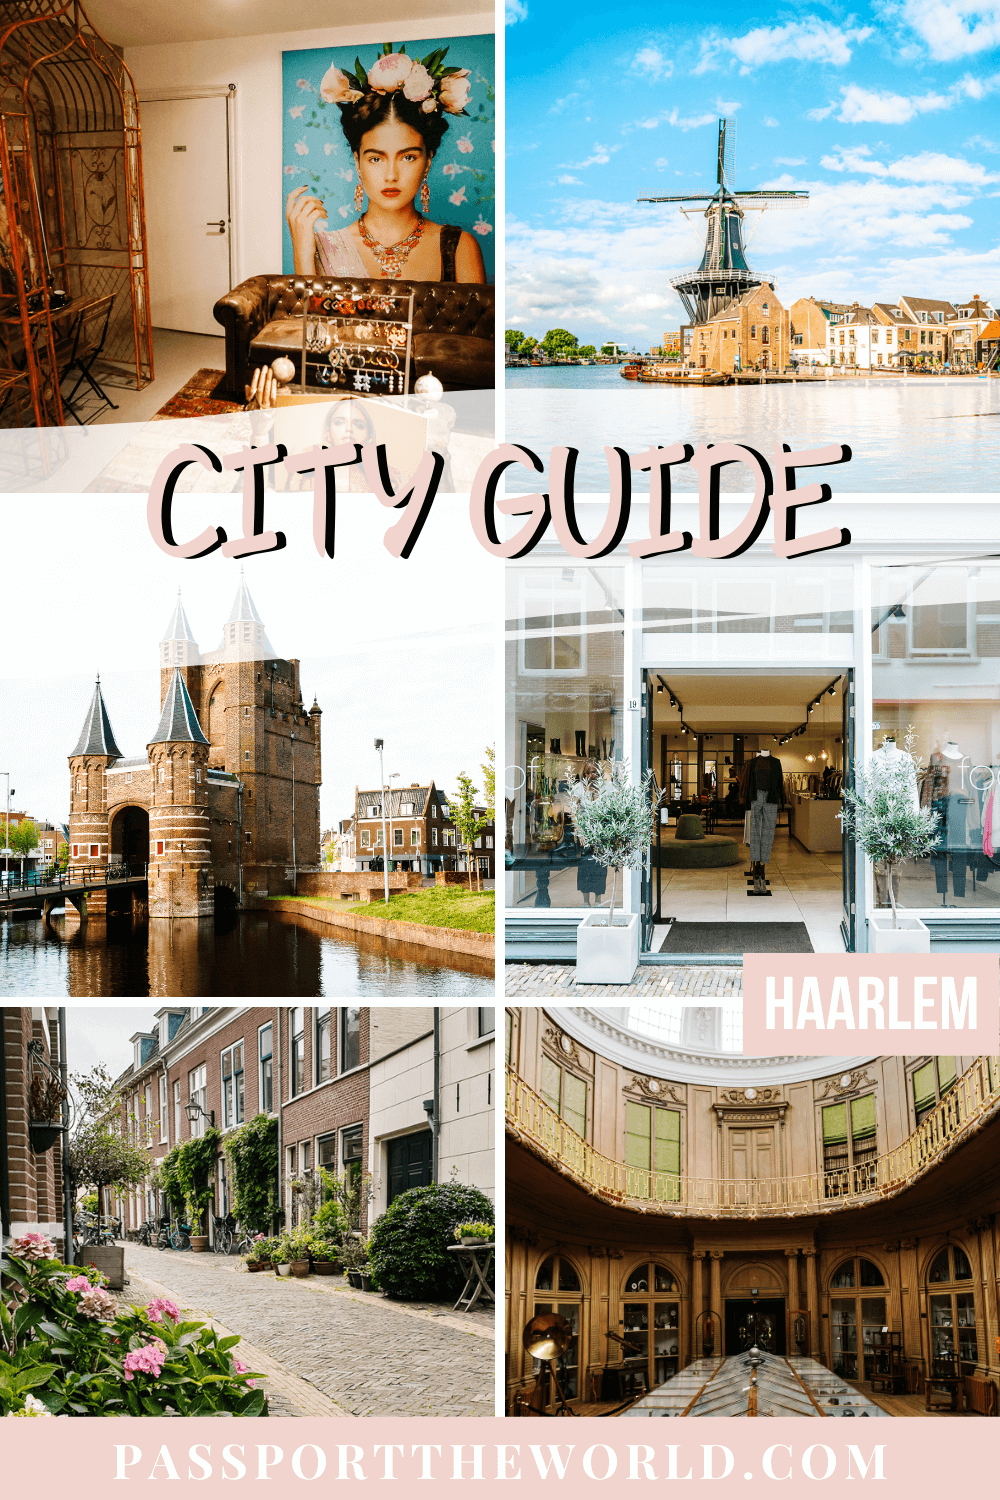 Discover the best things to do in Haarlem!